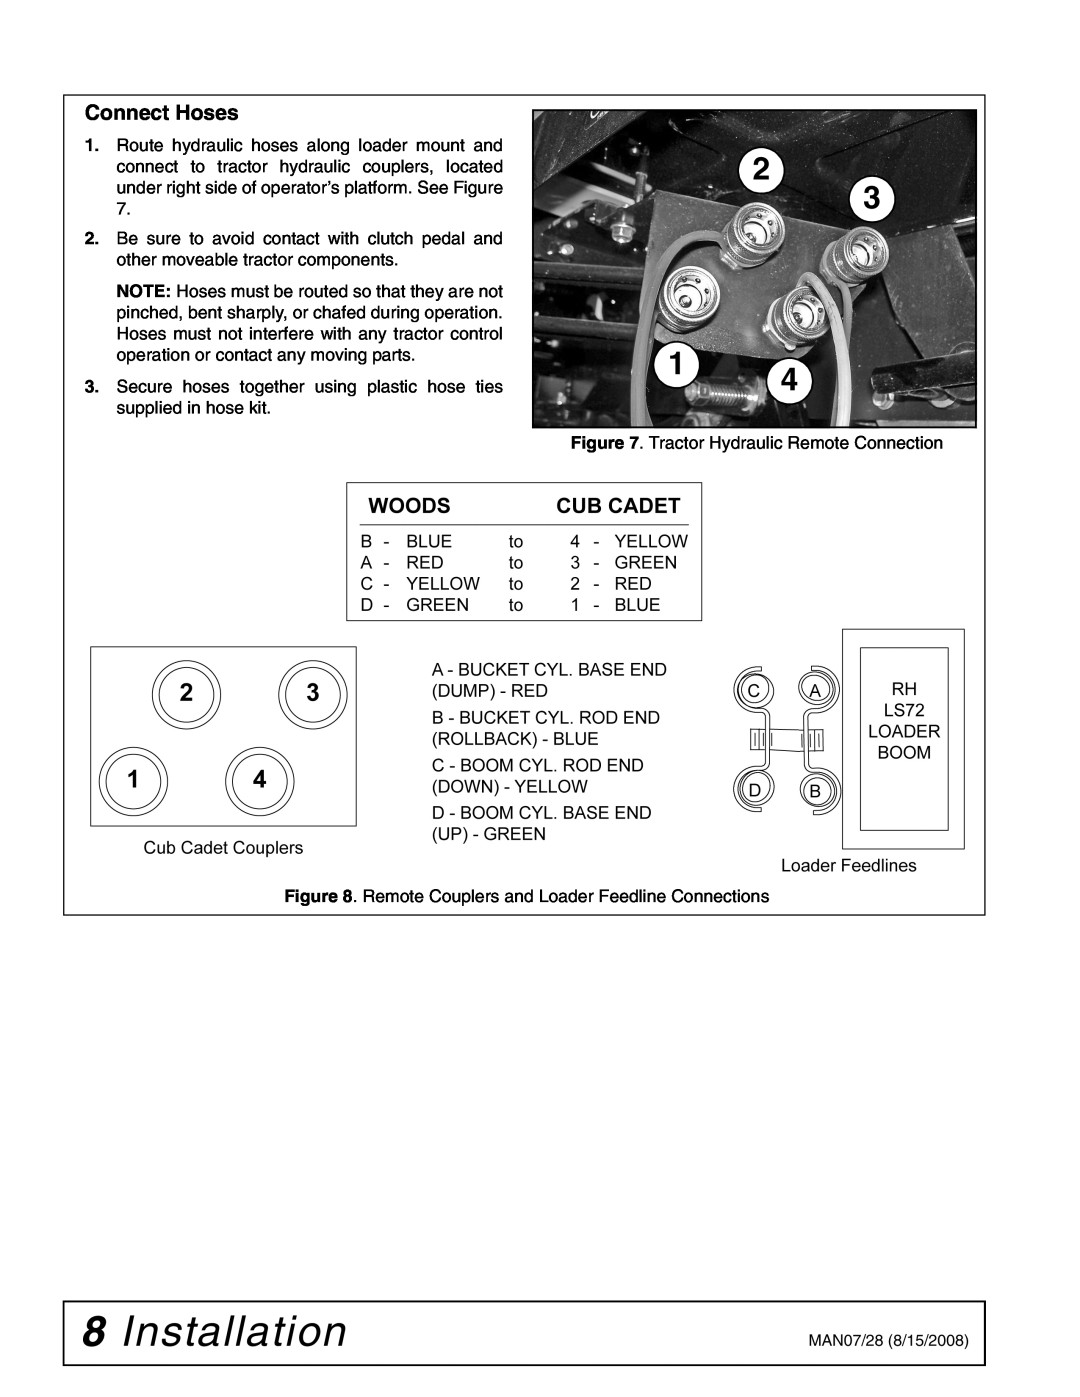 Woods Equipment 2100042 installation manual Installation, Connect Hoses 